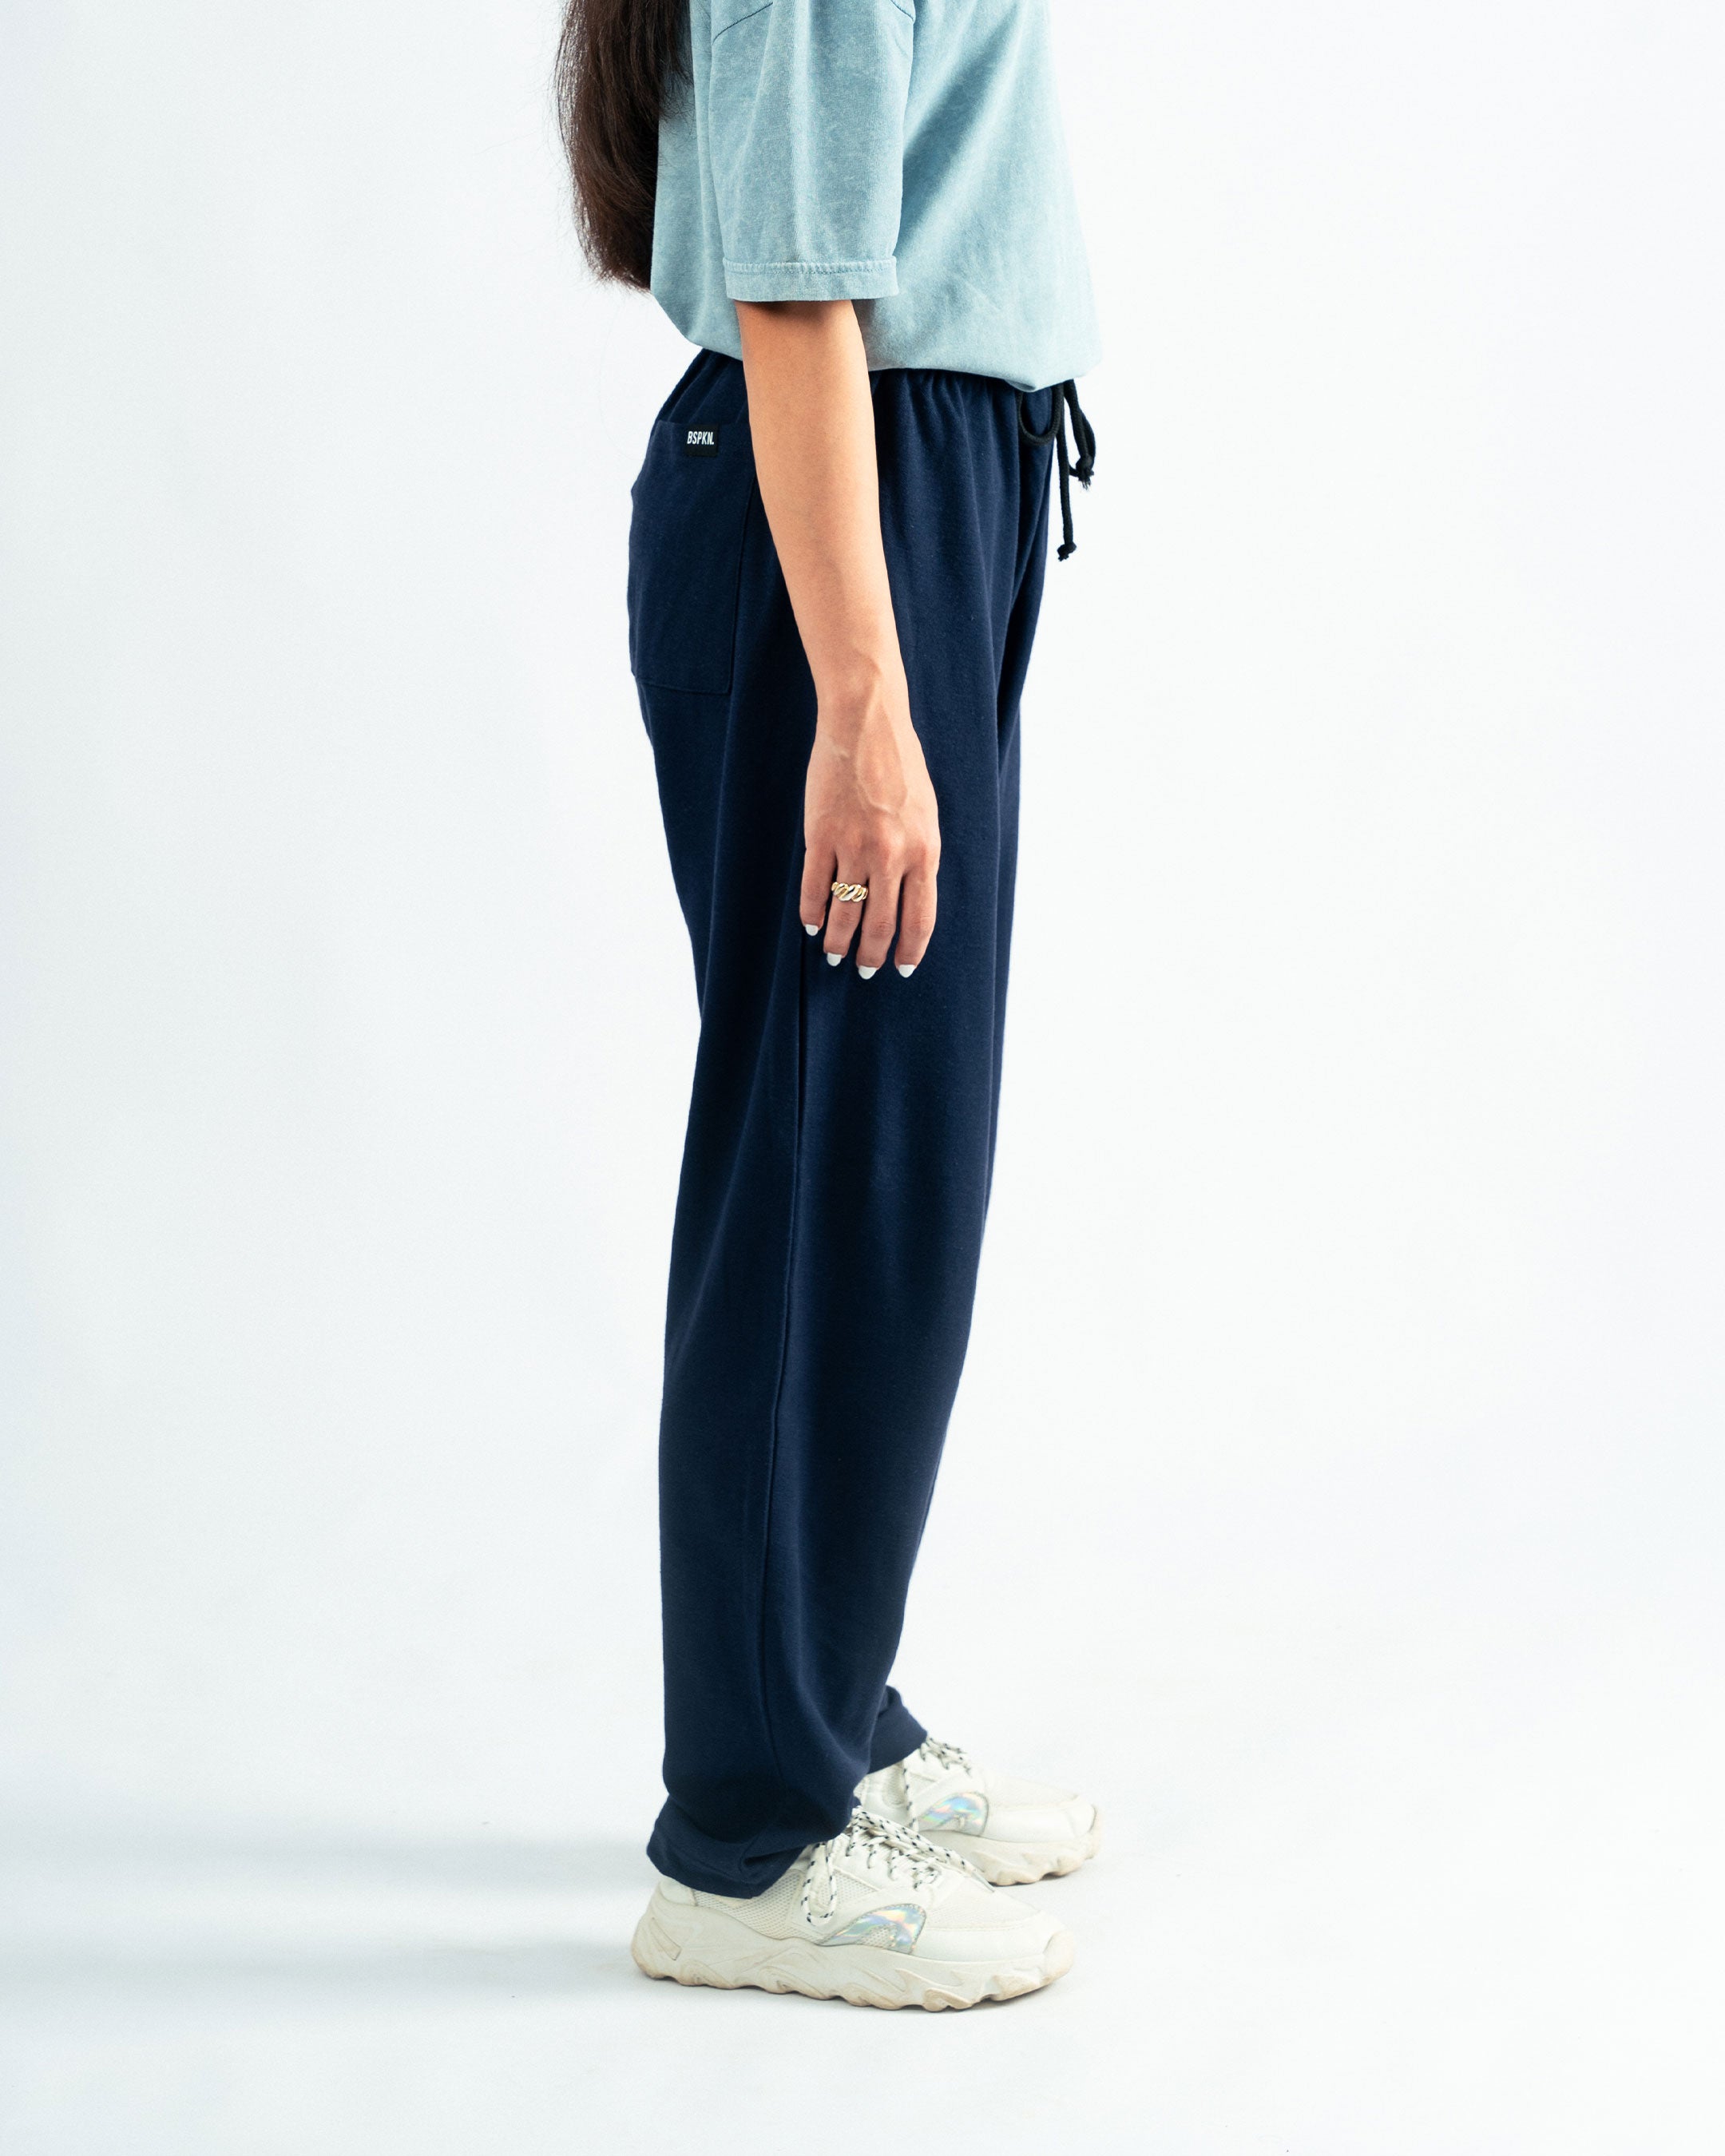 Navy Blue Trouser - Relaxed Fit